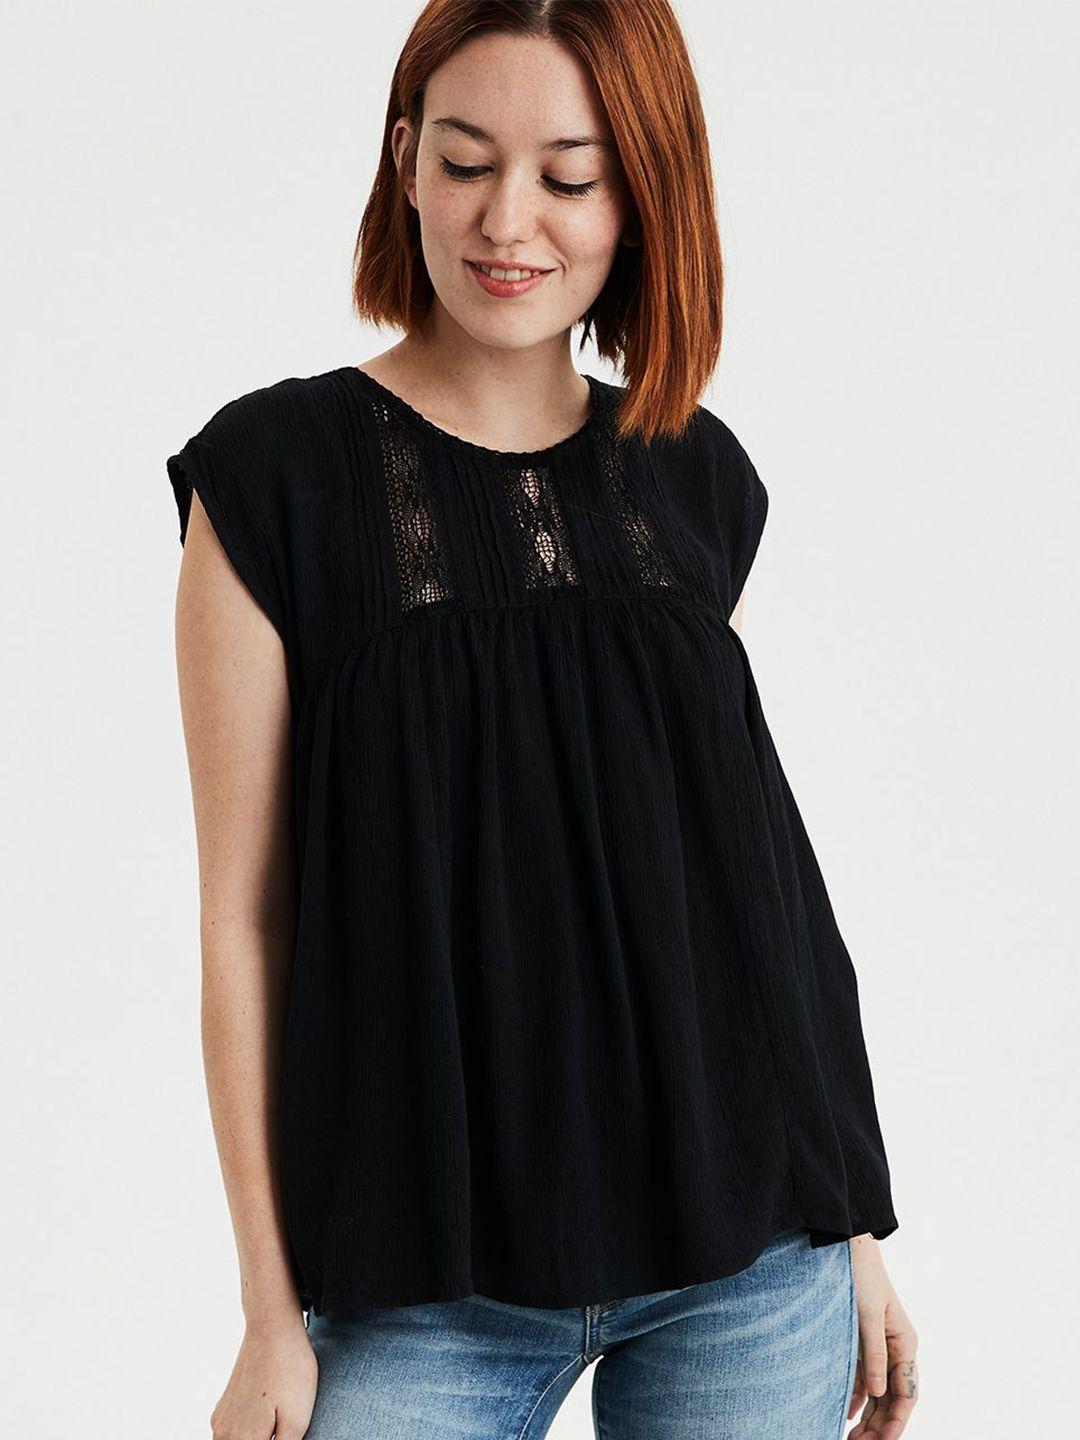 american-eagle-outfitters-women-black-self-design-top